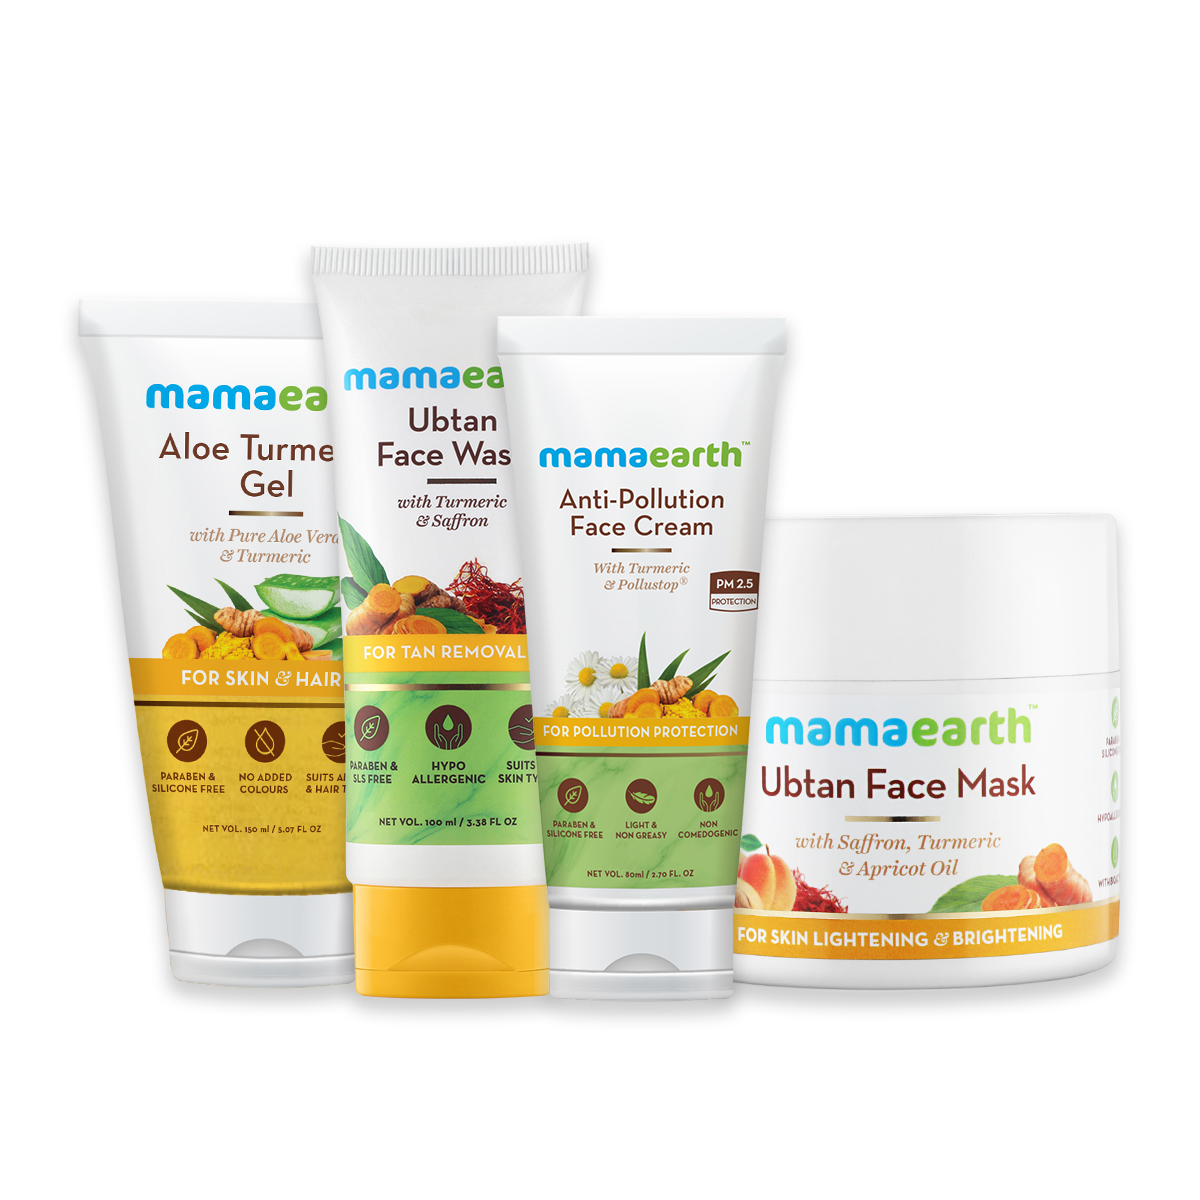 mamaearth products shop near me